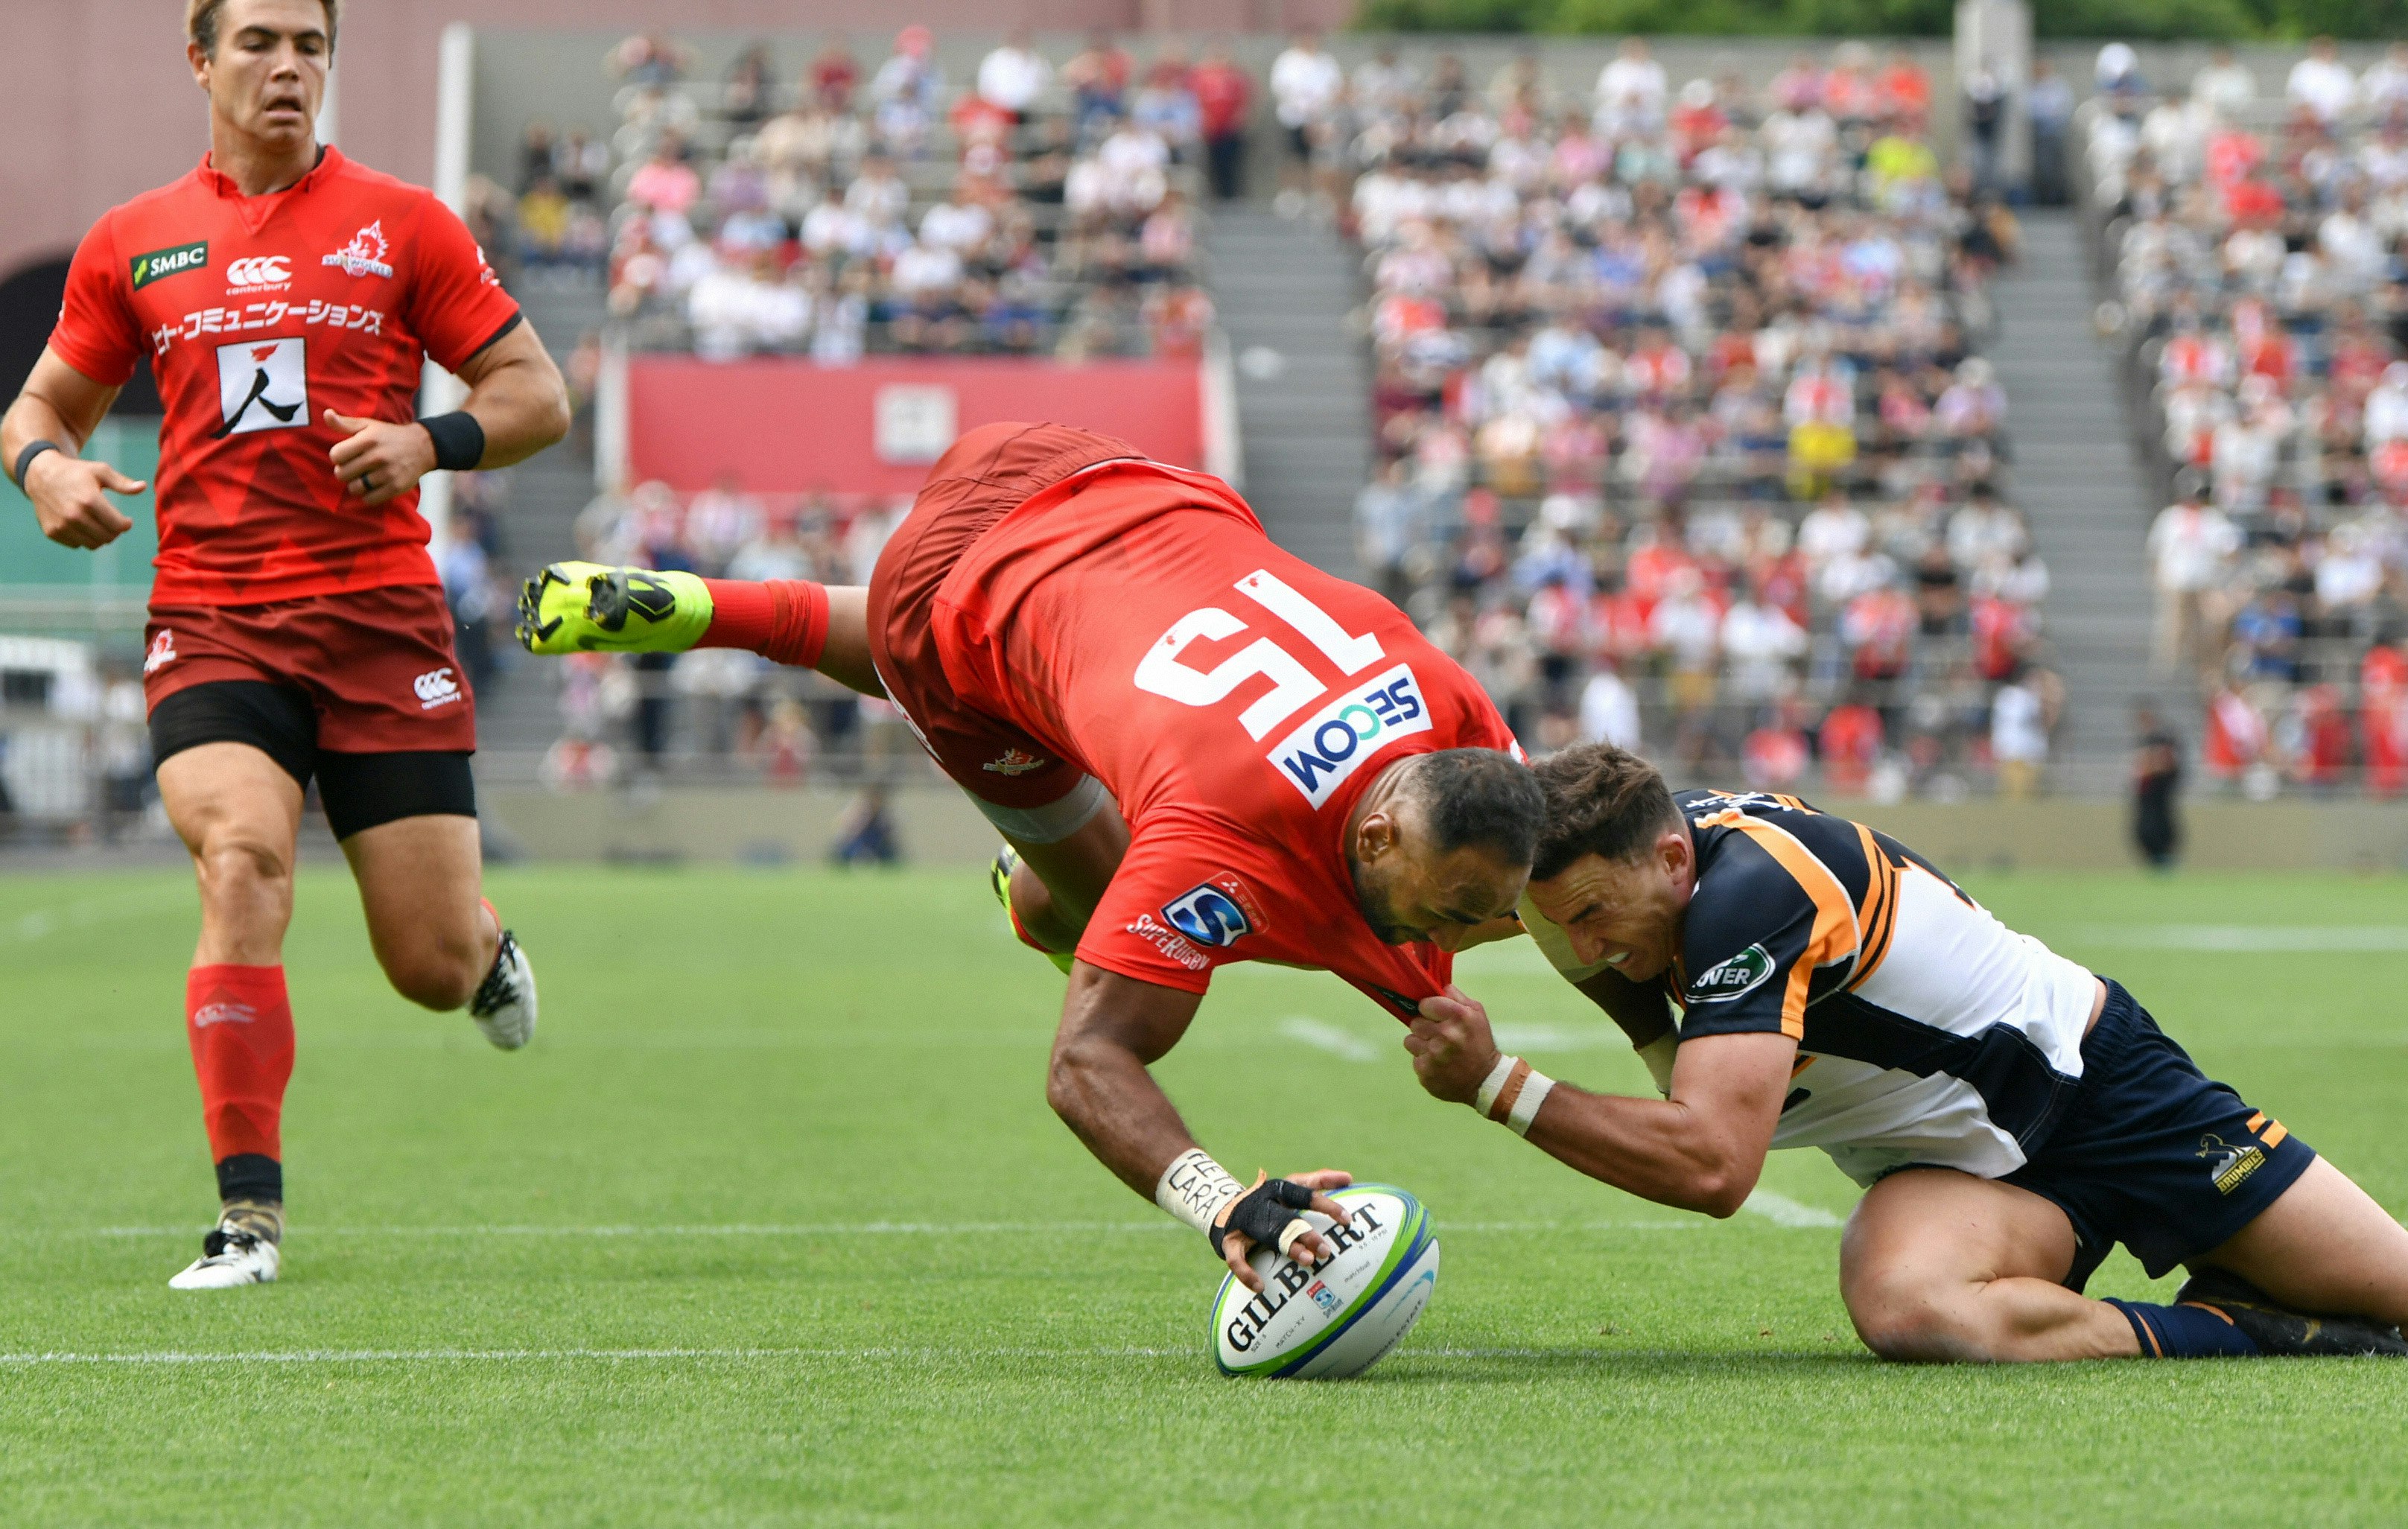 Semisi Masirewa of the Sunwolves scores a try during the Super Rugby match between Sunwolves and Brumbies at the Prince Chichibu Memorial Ground. The player is touching the ball on the ground while leaping into the air, with his legs above his head.